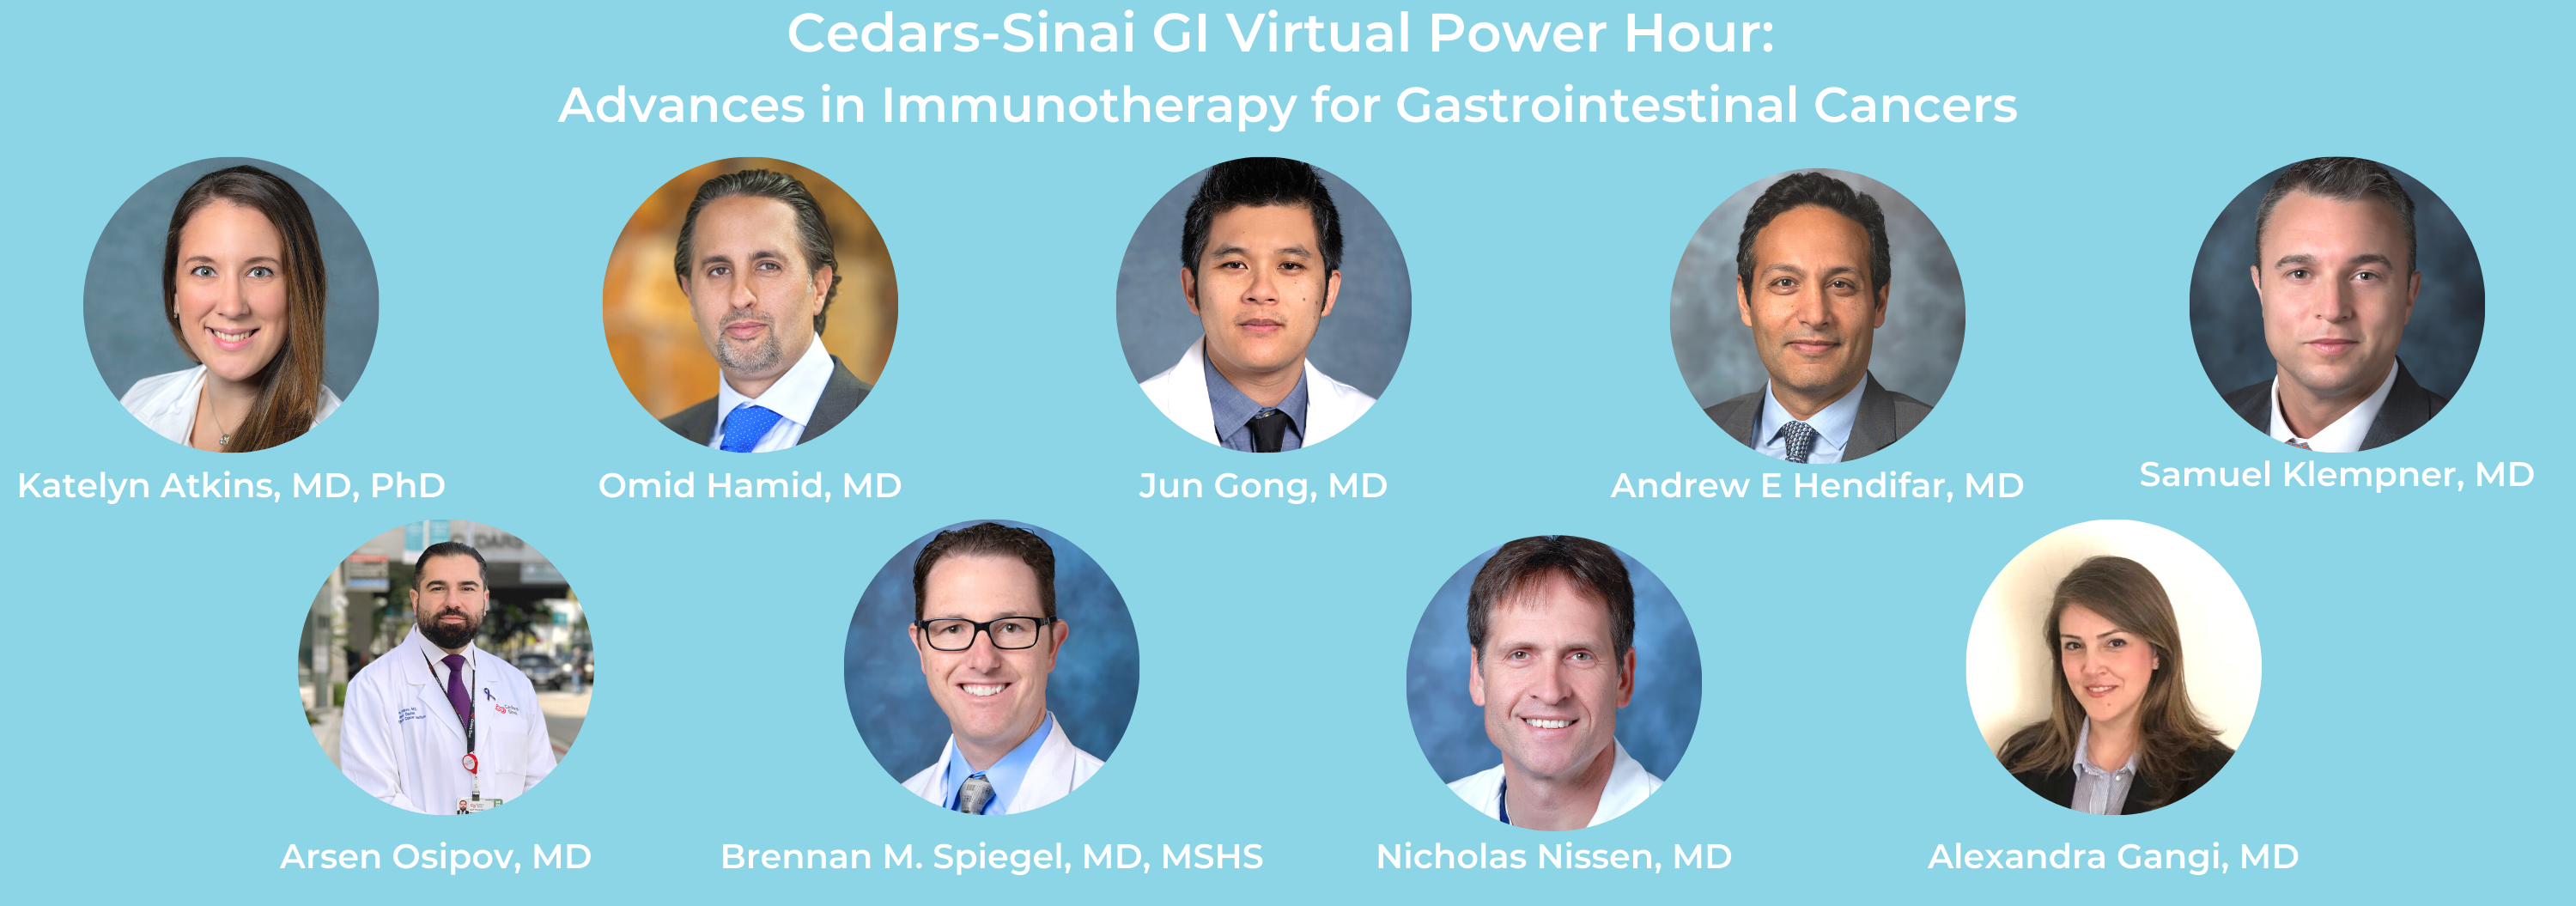 Cedars-Sinai GI Virtual Power Hour: Advances in Immunotherapy for Gastrointestinal Cancers Banner